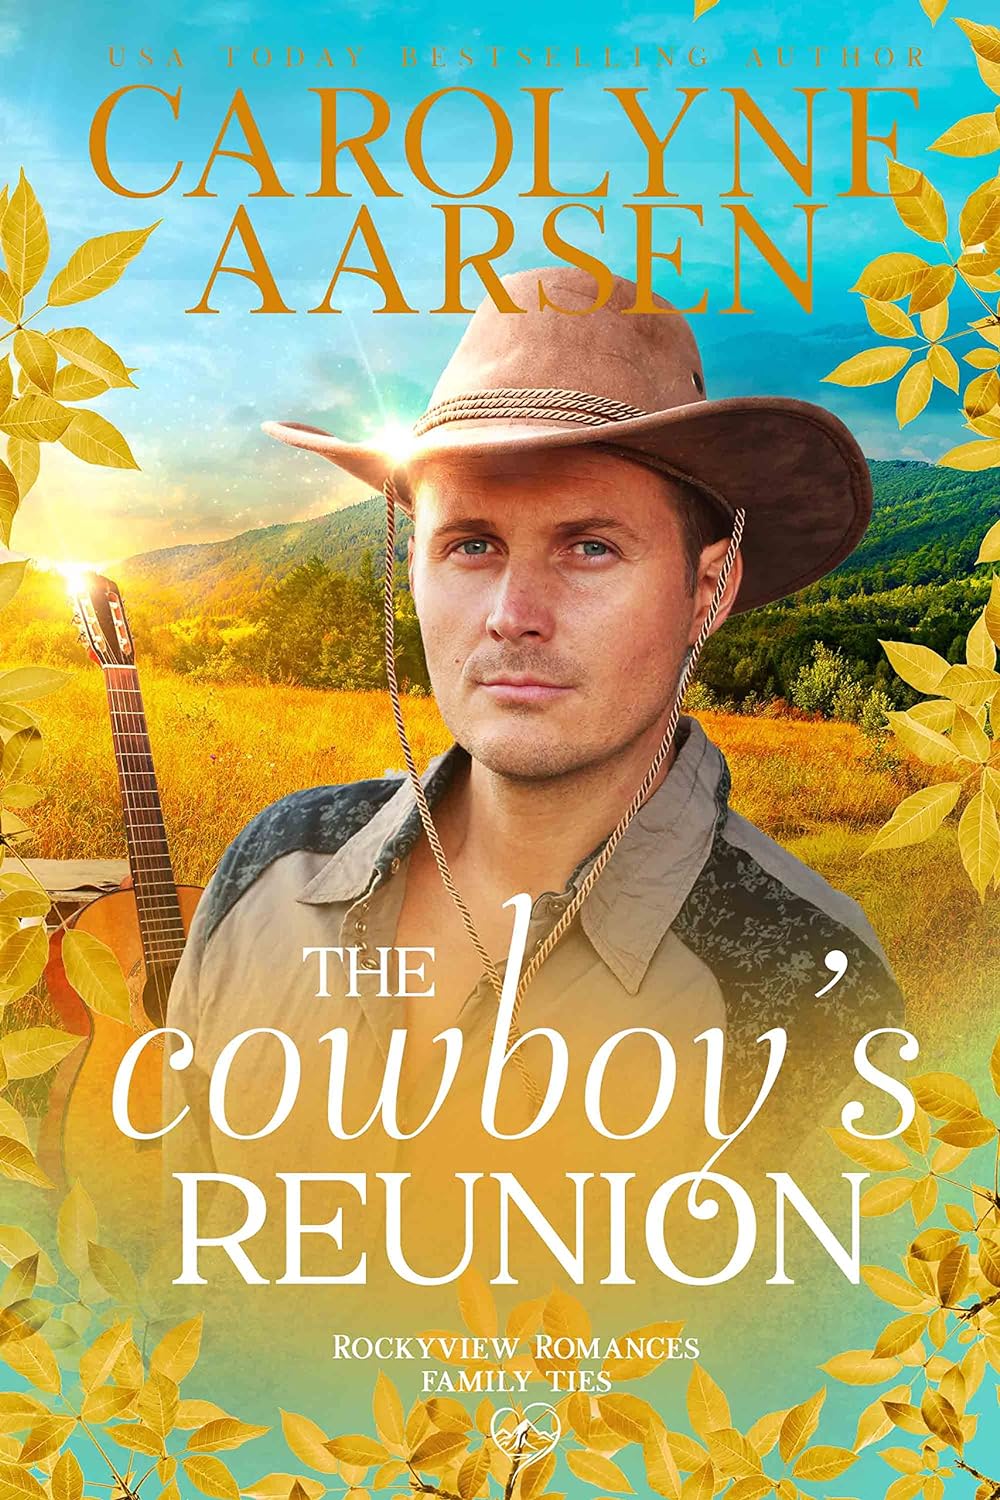 Western Rockyview Romance by USA Today Bestselling Author Carolyne Aarsen